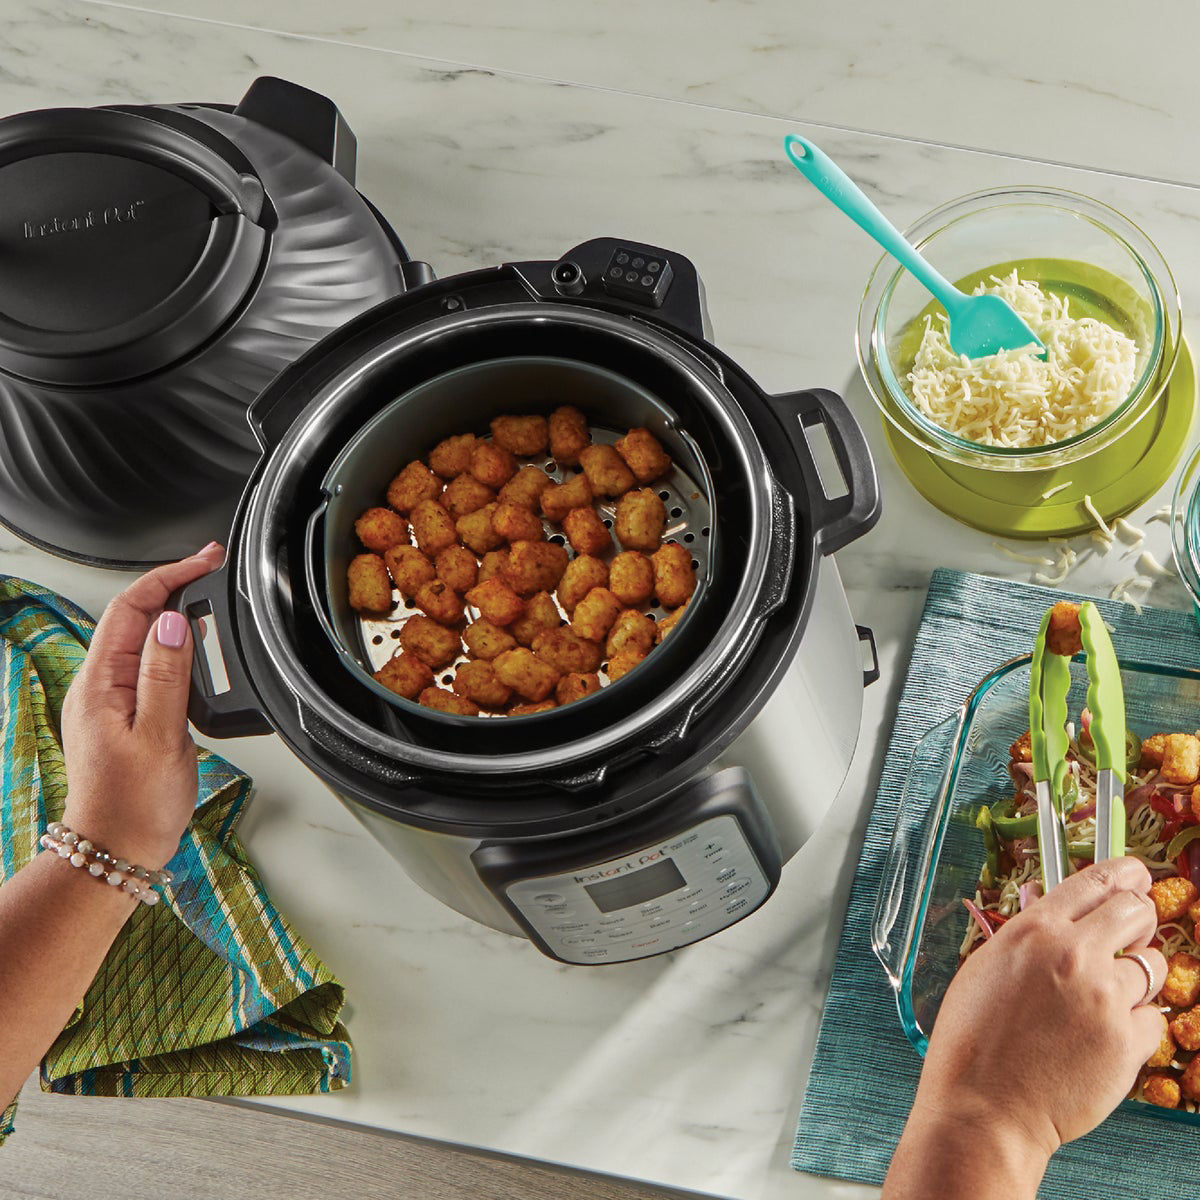 The Instant Pot Duo Crisp and Air Fryer Combines the Best of Two Worlds